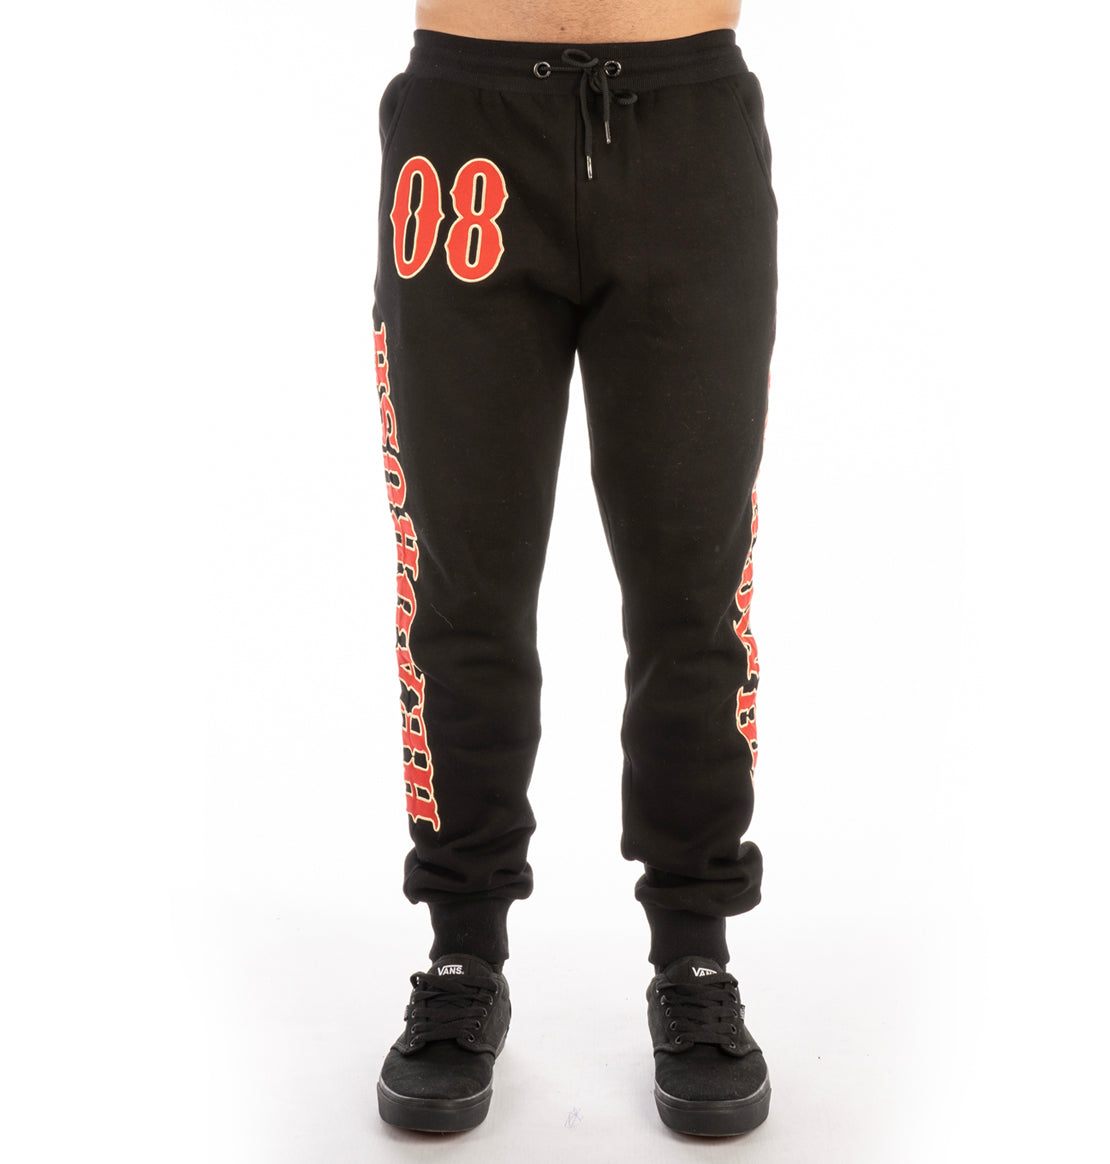 THE CHIEF - MENS JOGGERS – HR Distribution